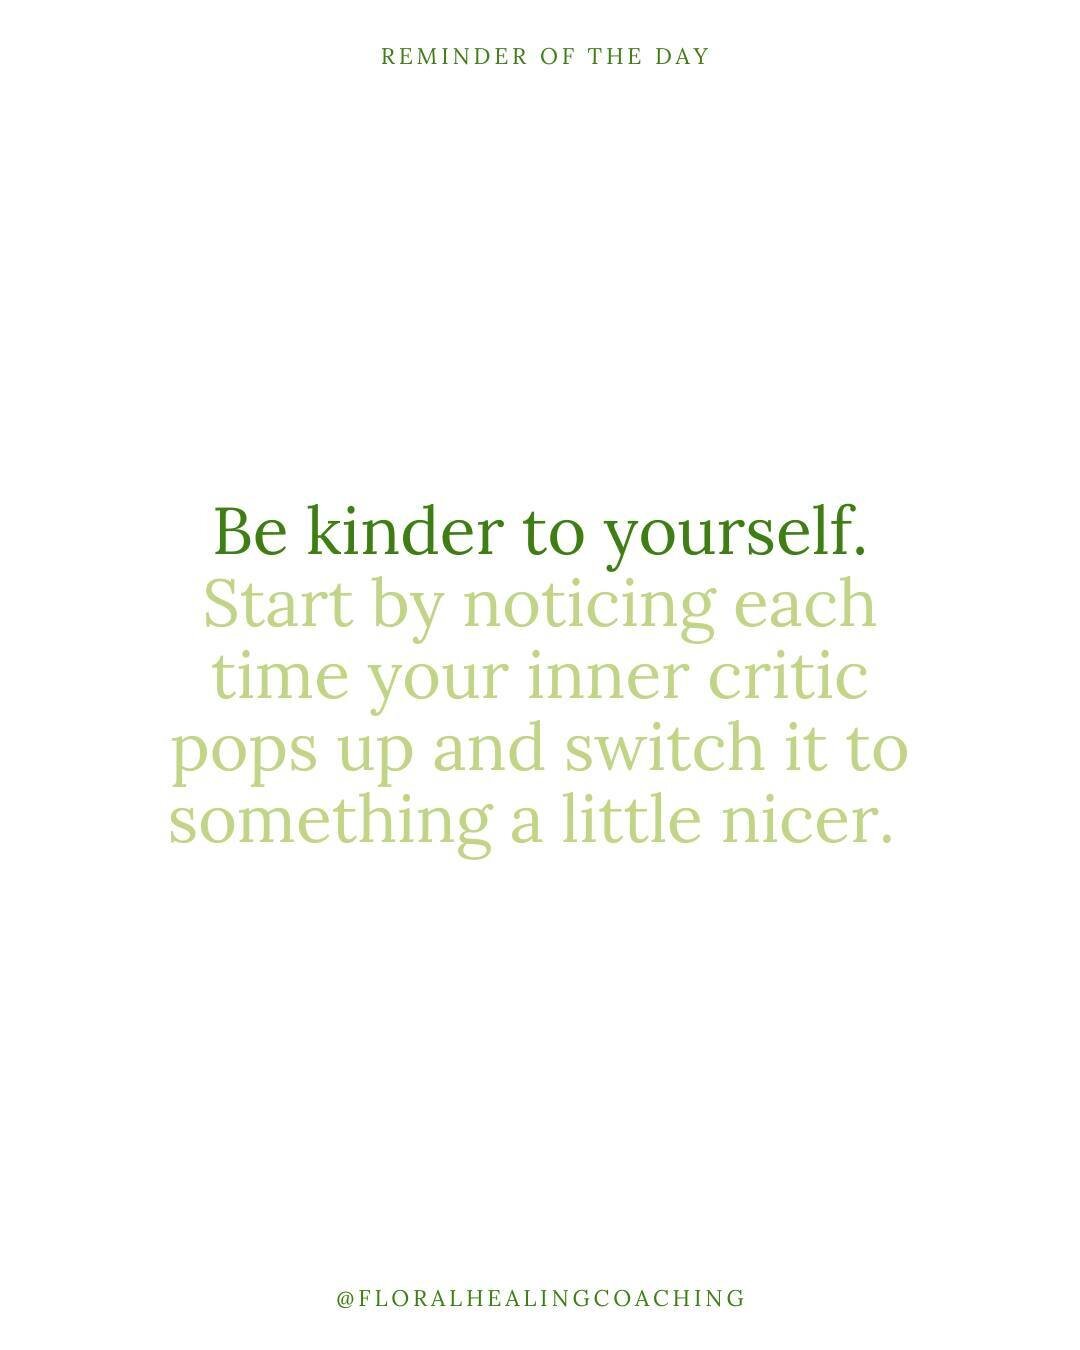 Embrace Self-Kindness: Silence Your Inner Critic 

In the hustle and bustle of life, it's easy to be hard on ourselves. We set high expectations, relentlessly compare ourselves to others, and allow our inner critic to take center stage. But here's th